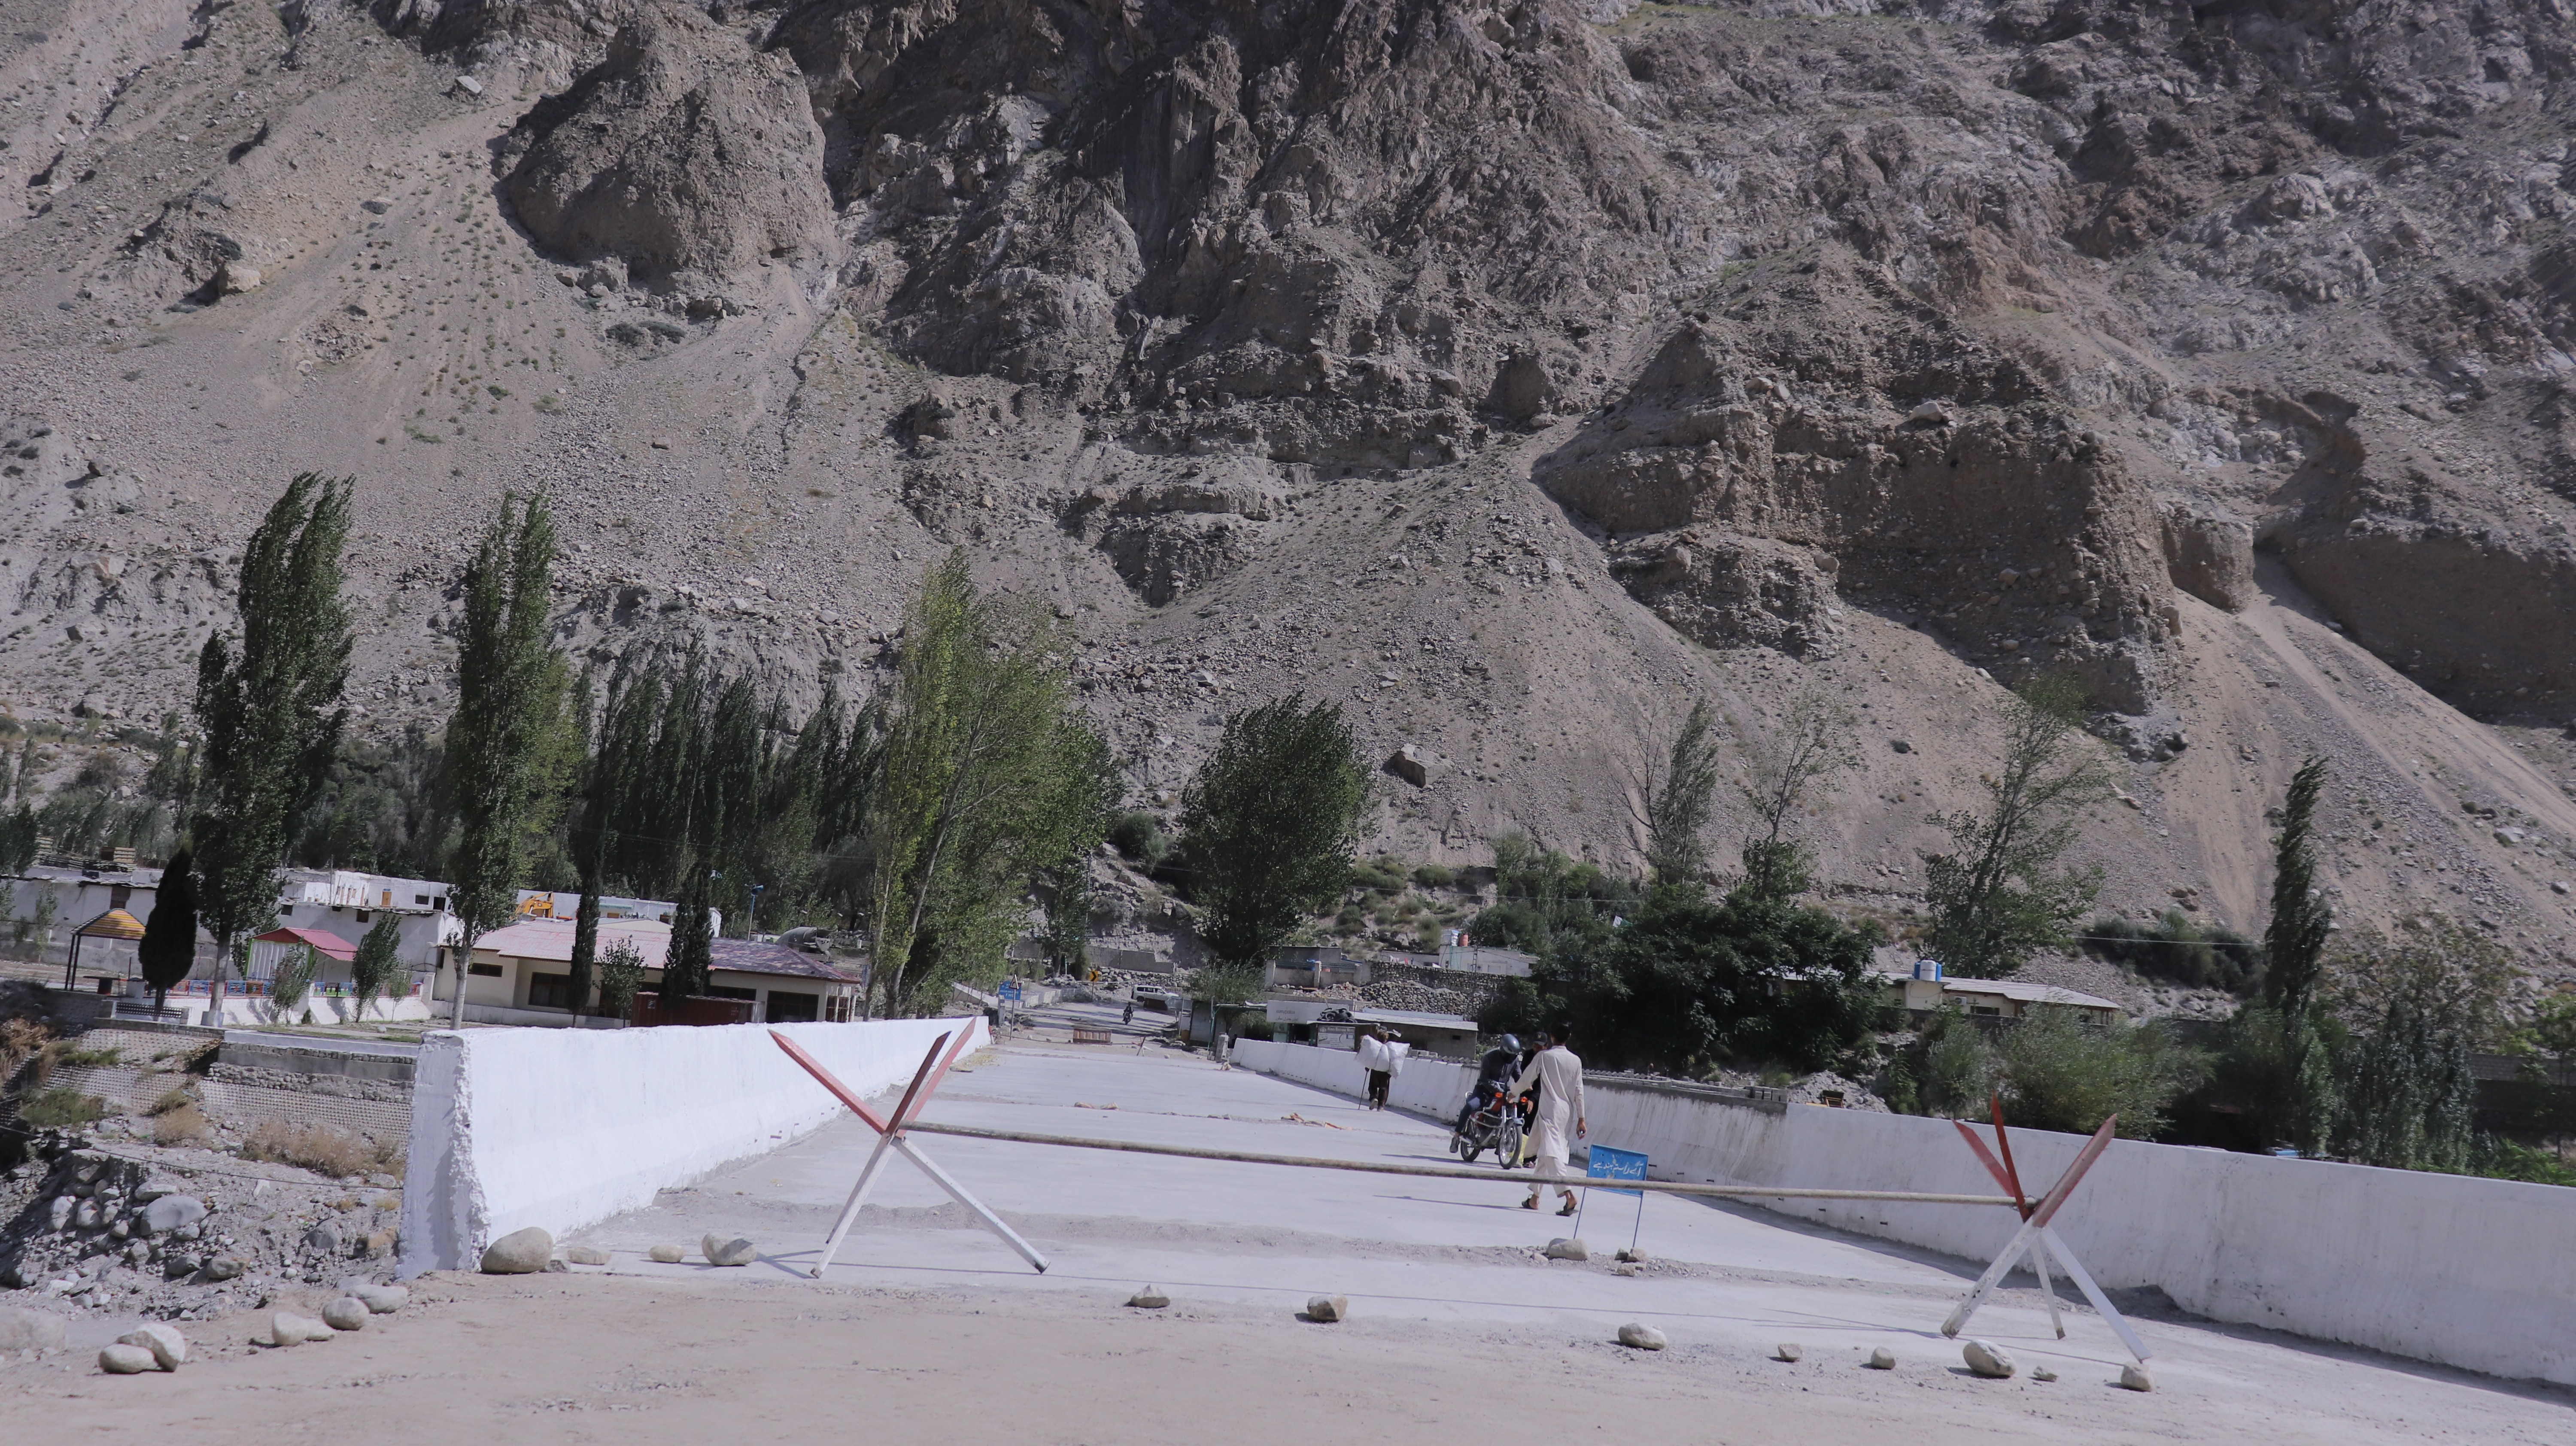 People passing by  temporarily closed Hassanabad bridge under construction in Gilgit Baltistan